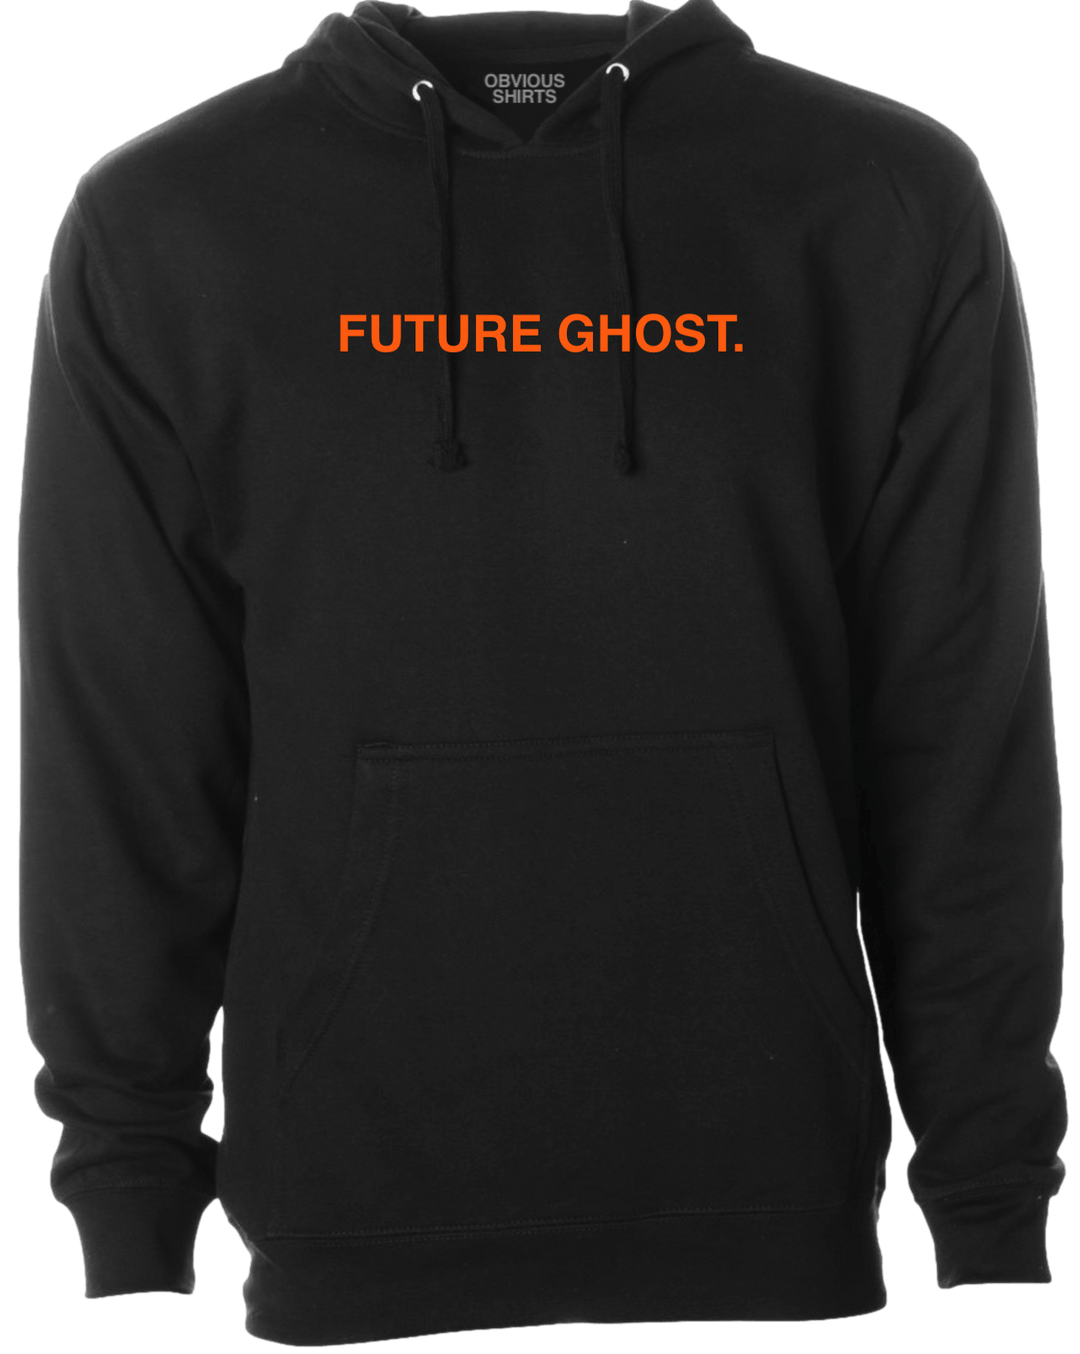 FUTURE GHOST (HOODED SWEATSHIRT) - OBVIOUS SHIRTS